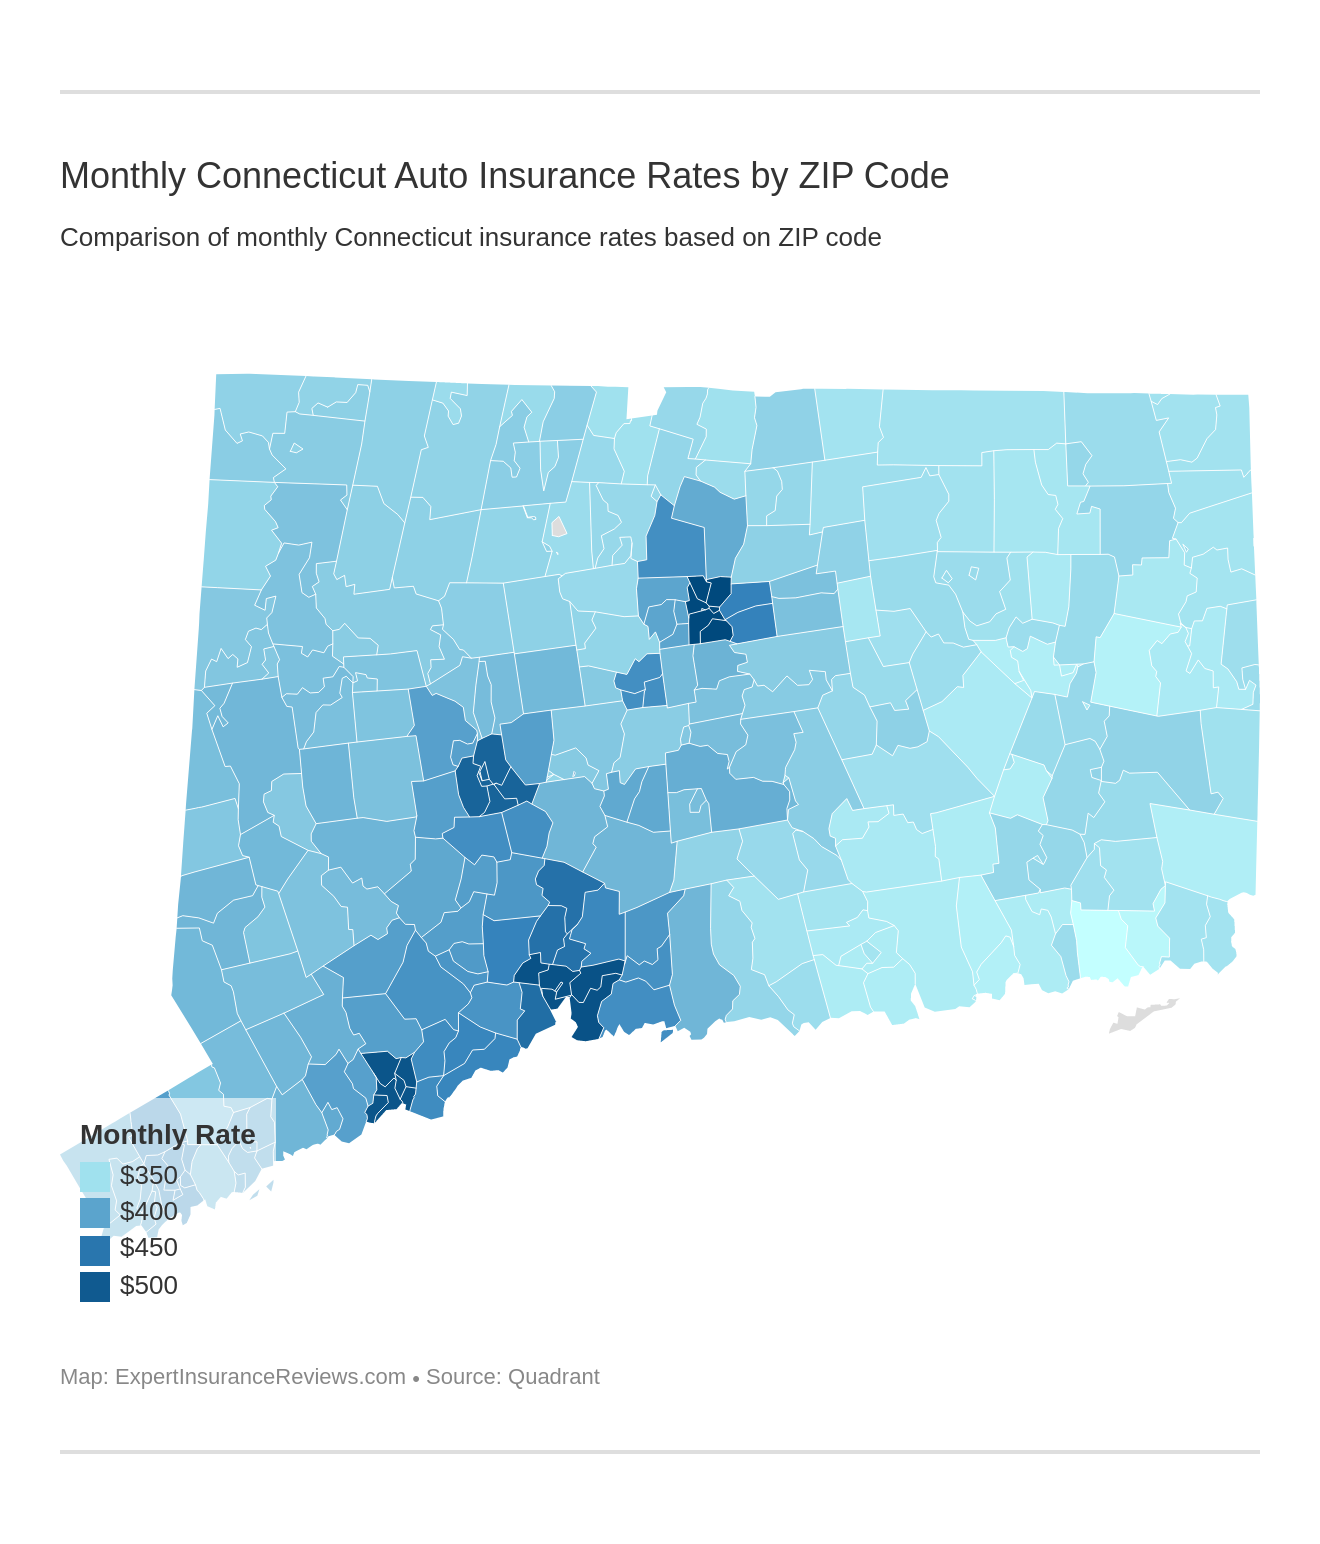 Monthly Connecticut Auto Insurance Rates by ZIP Code